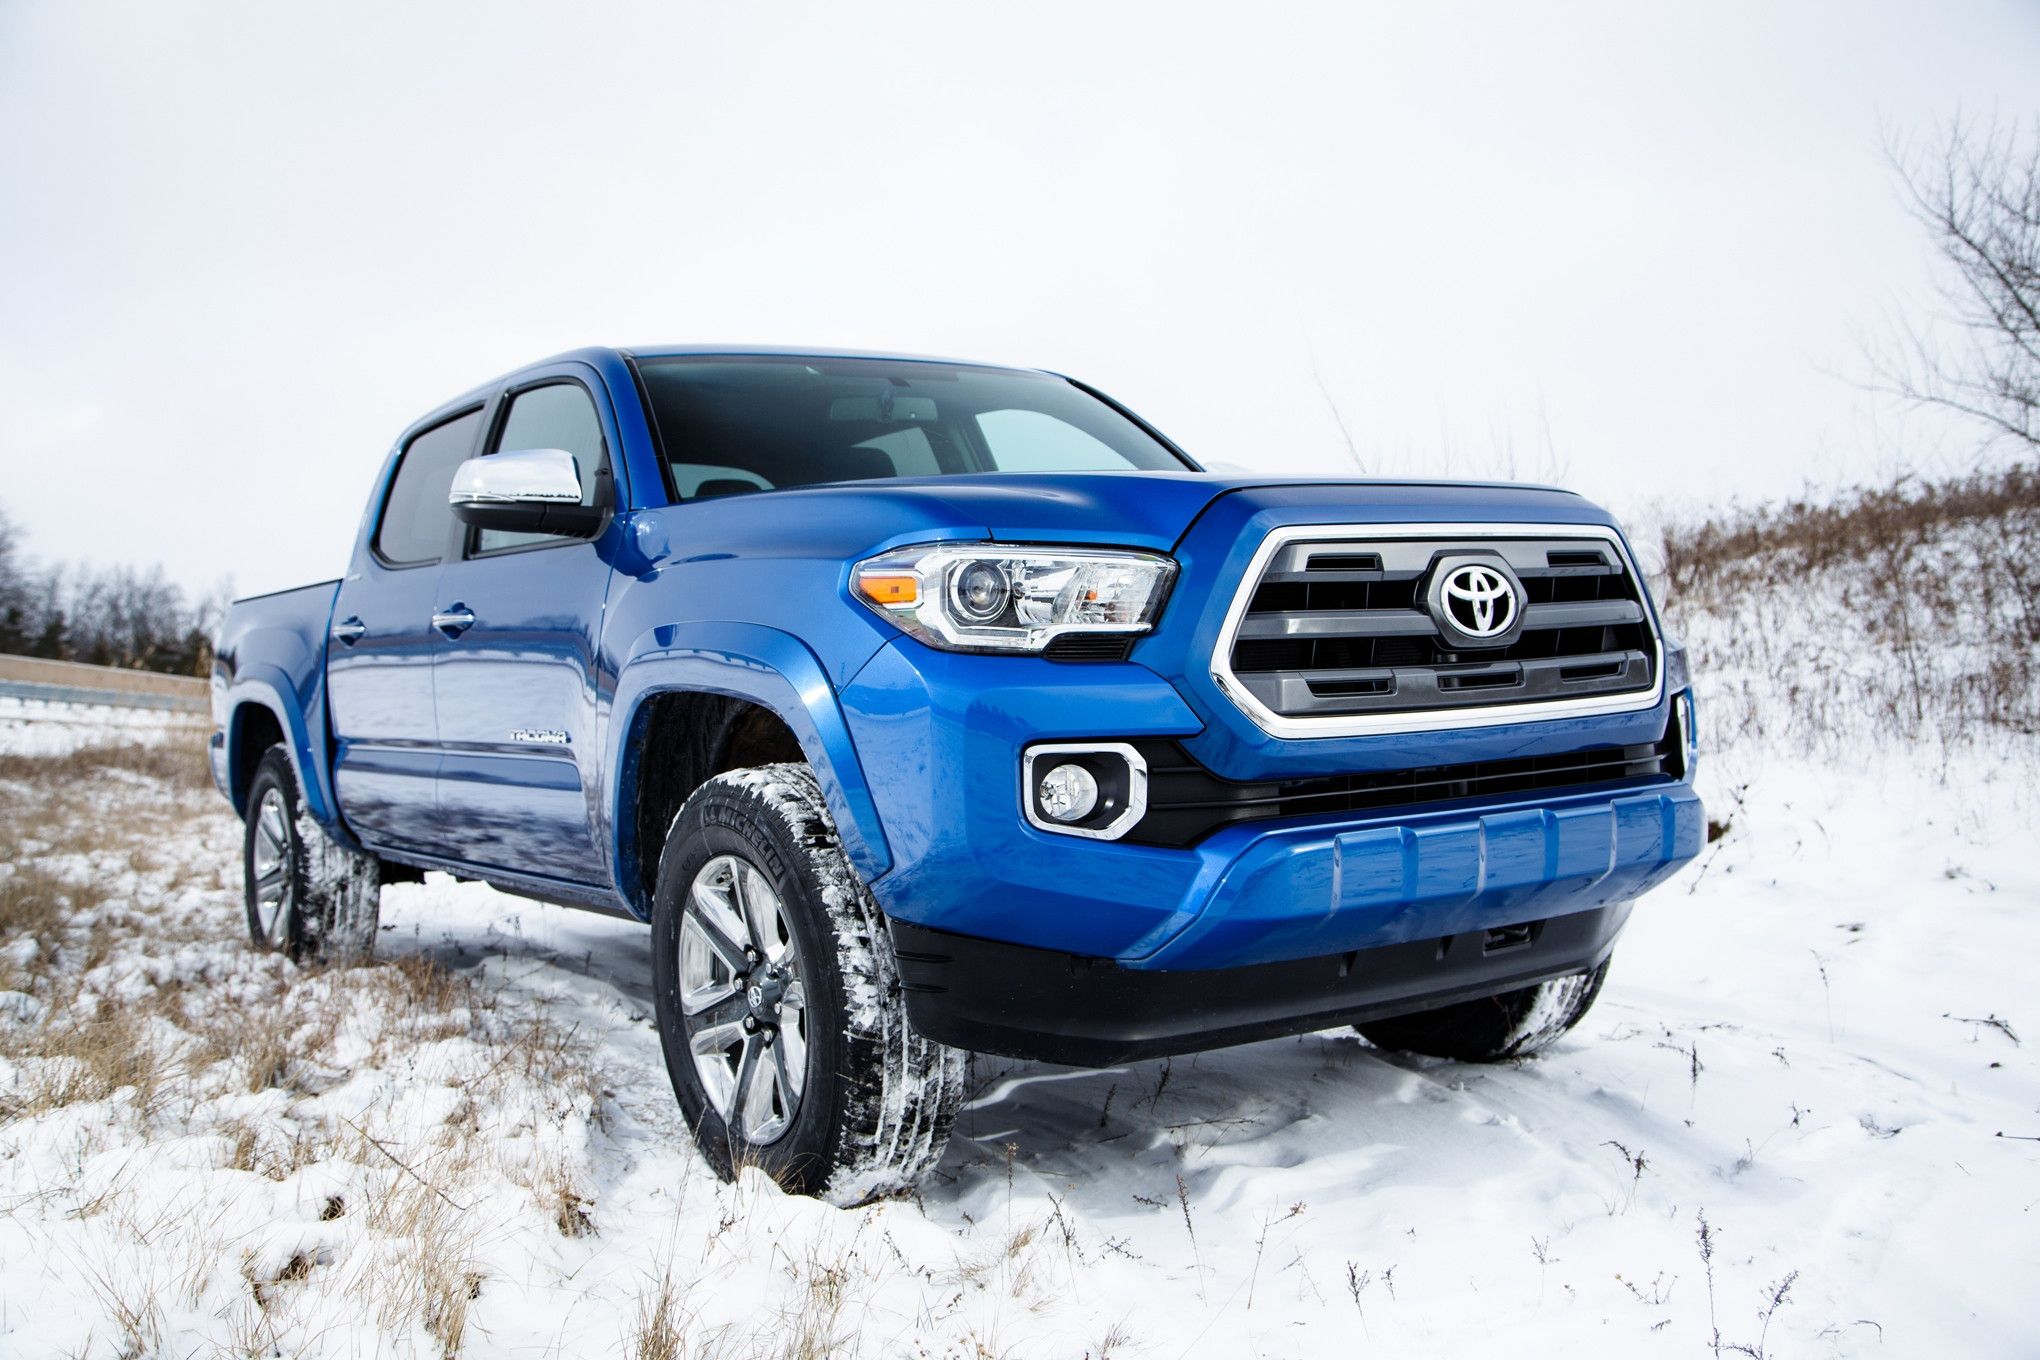 2016 Toyota Tacoma HD Picture - New Car Concepts